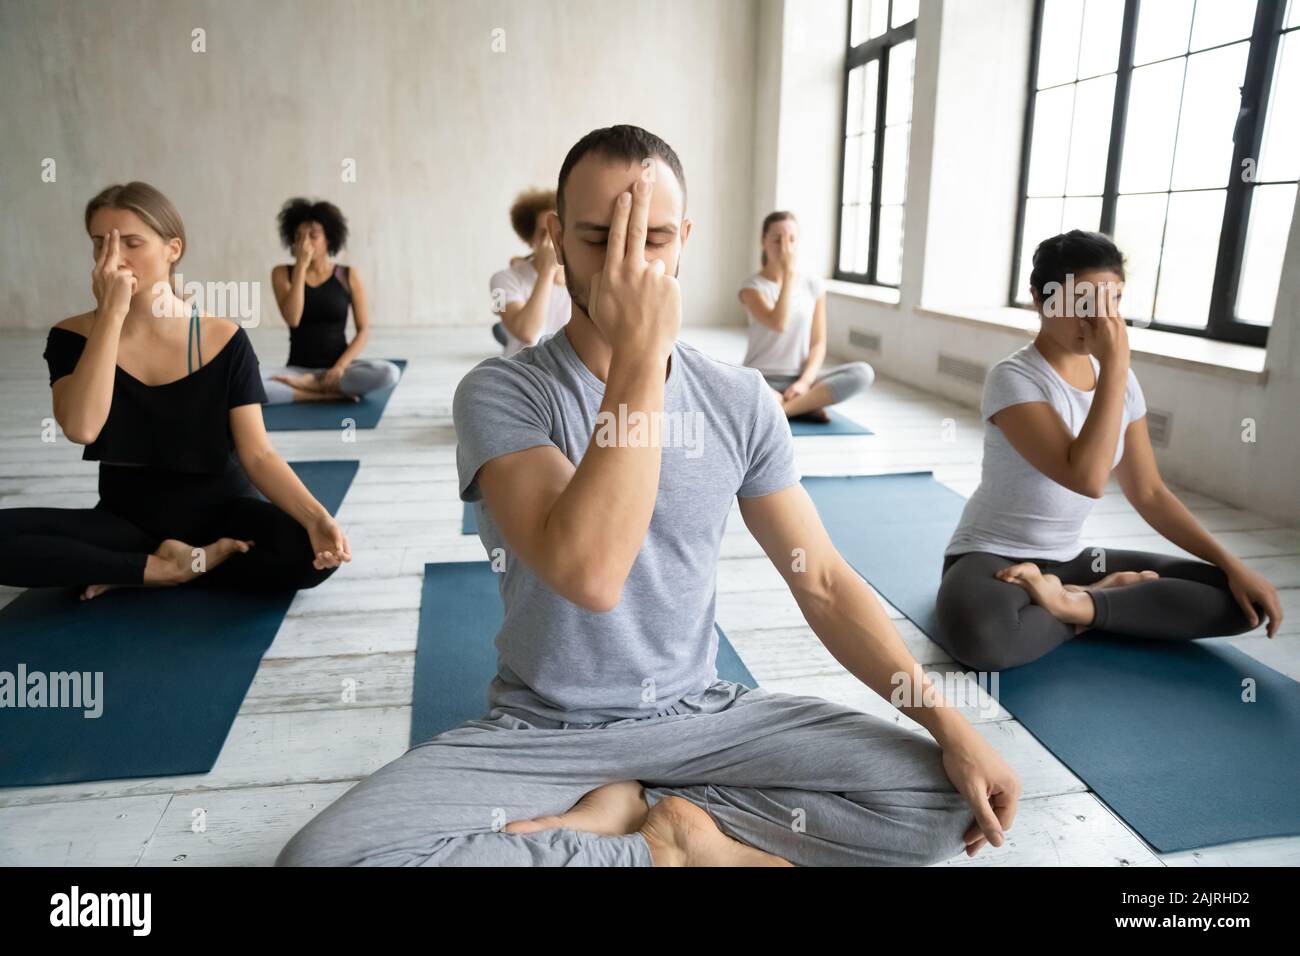 Diverse people doing Alternate Nostril Breathing exercise, practicing yoga Stock Photo